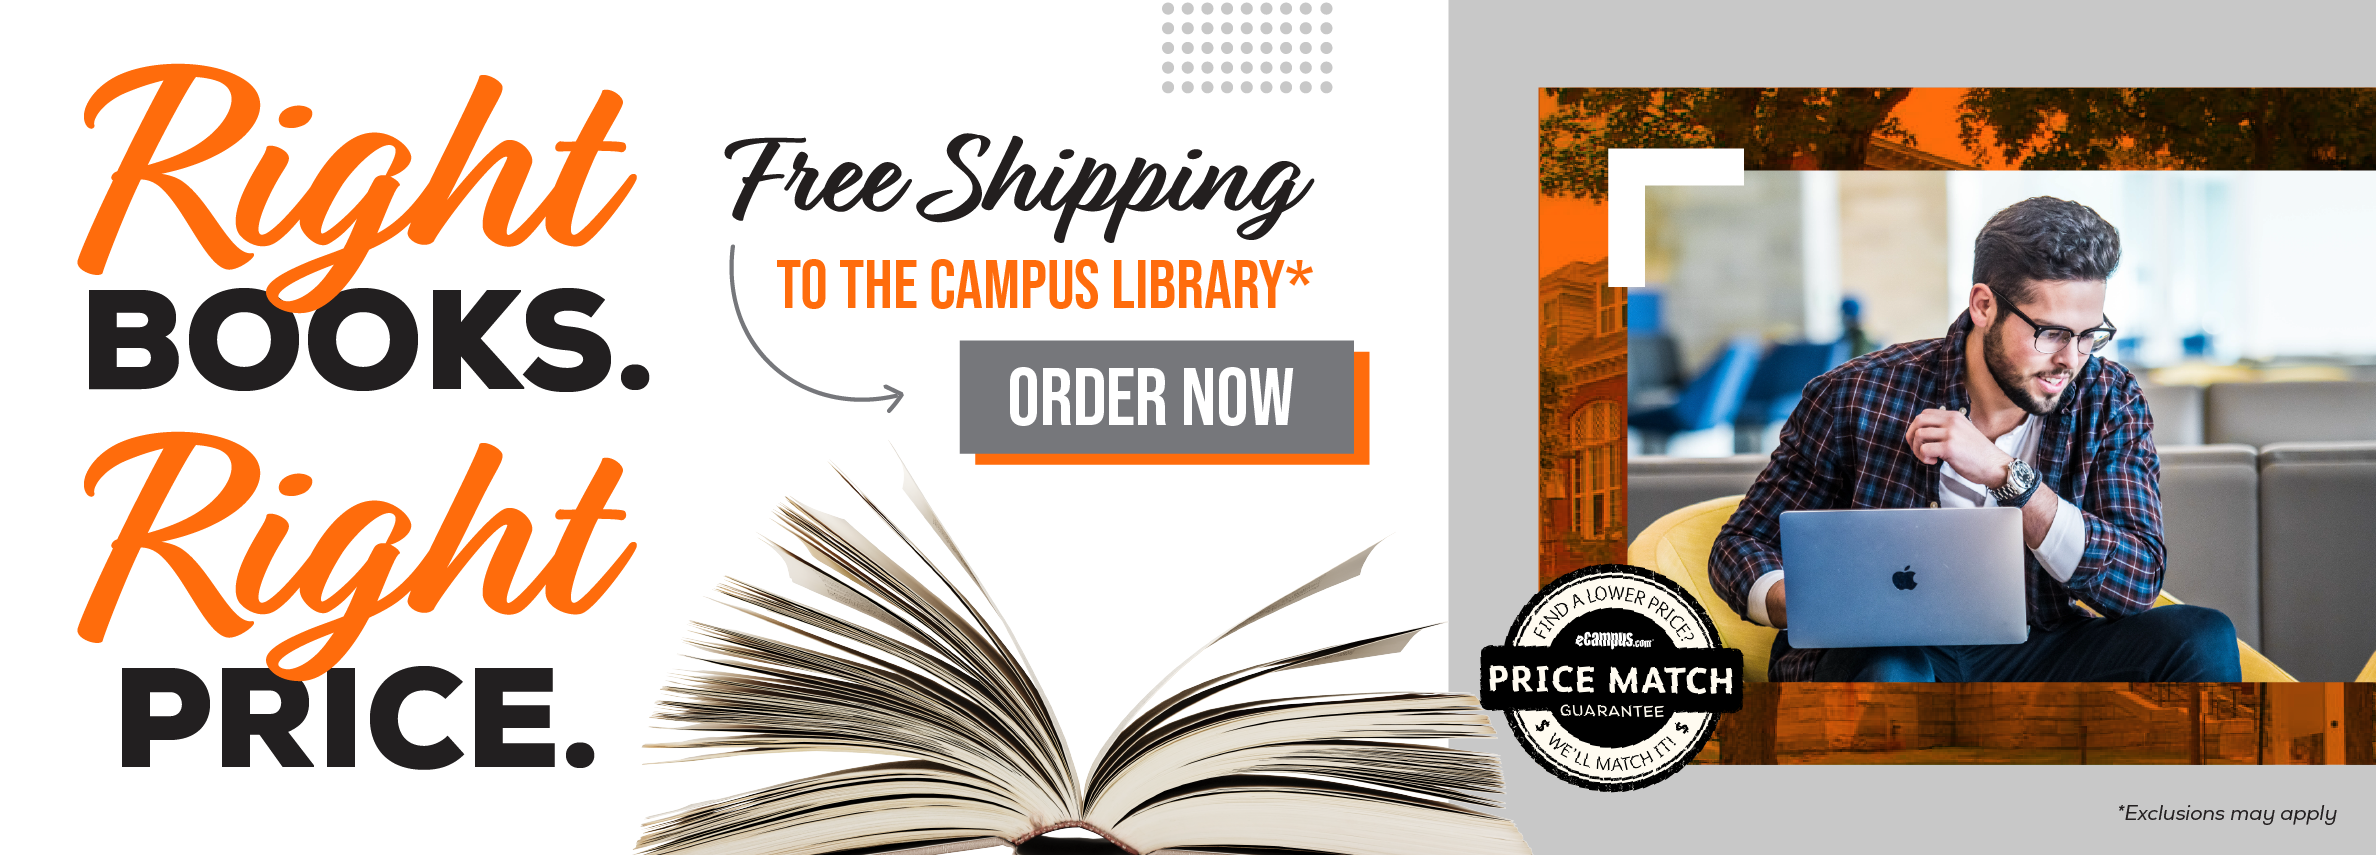 Right books. Right price. Free shipping to the campus library.* Order now. Price Match Guarantee. *Exclusions may apply.